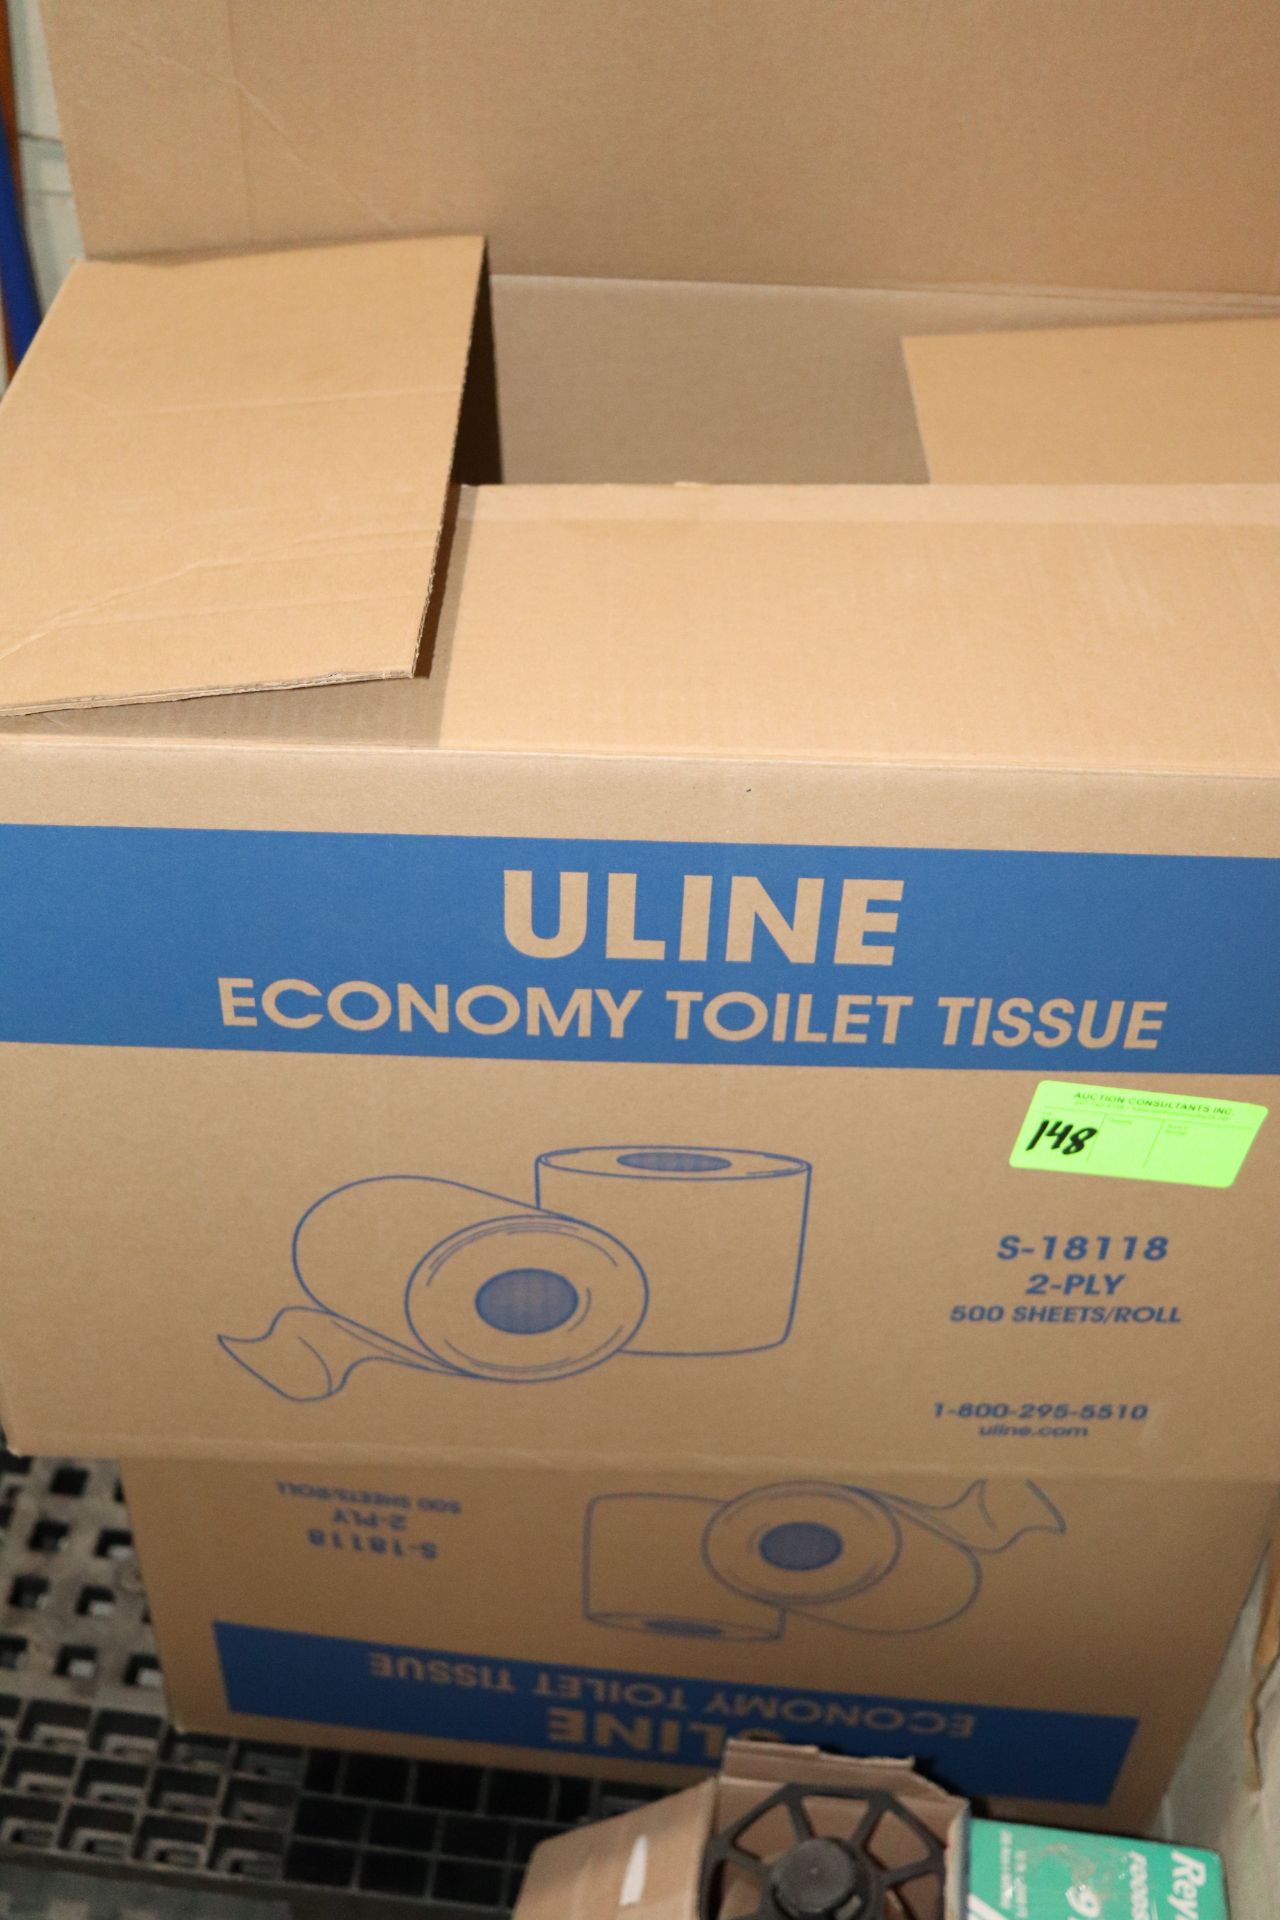 One and a half cases of Uline economy toilet tissue